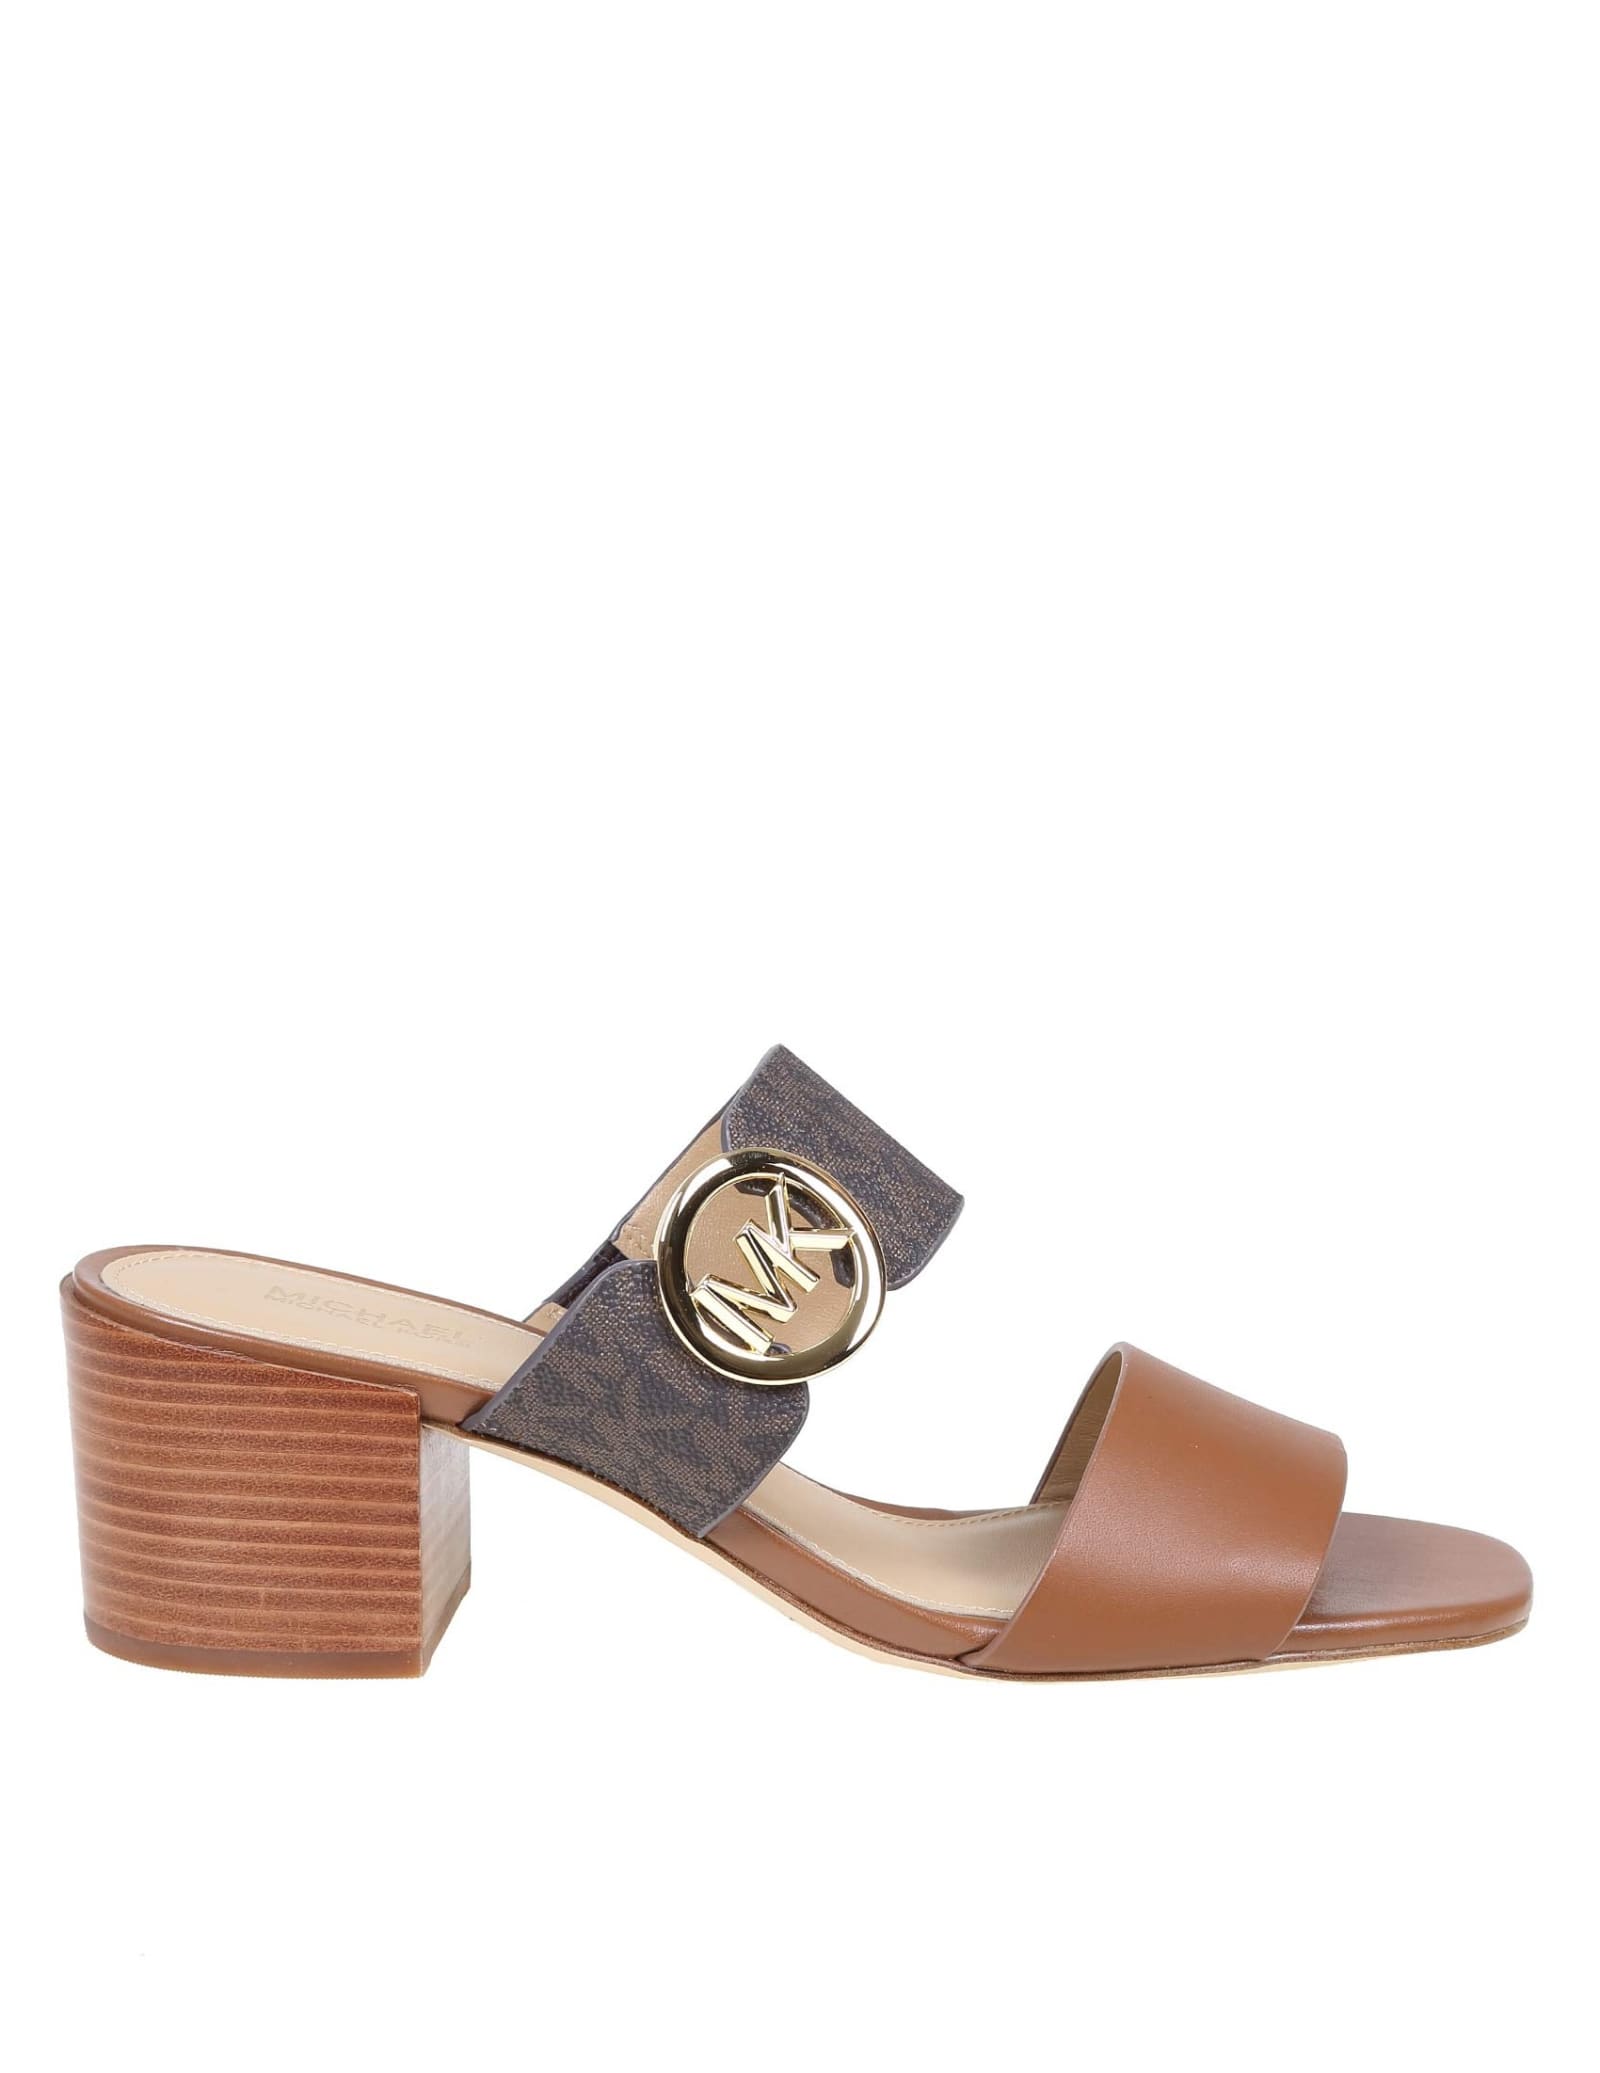 Michael Kors Summer Mid Sandal In Leather Color